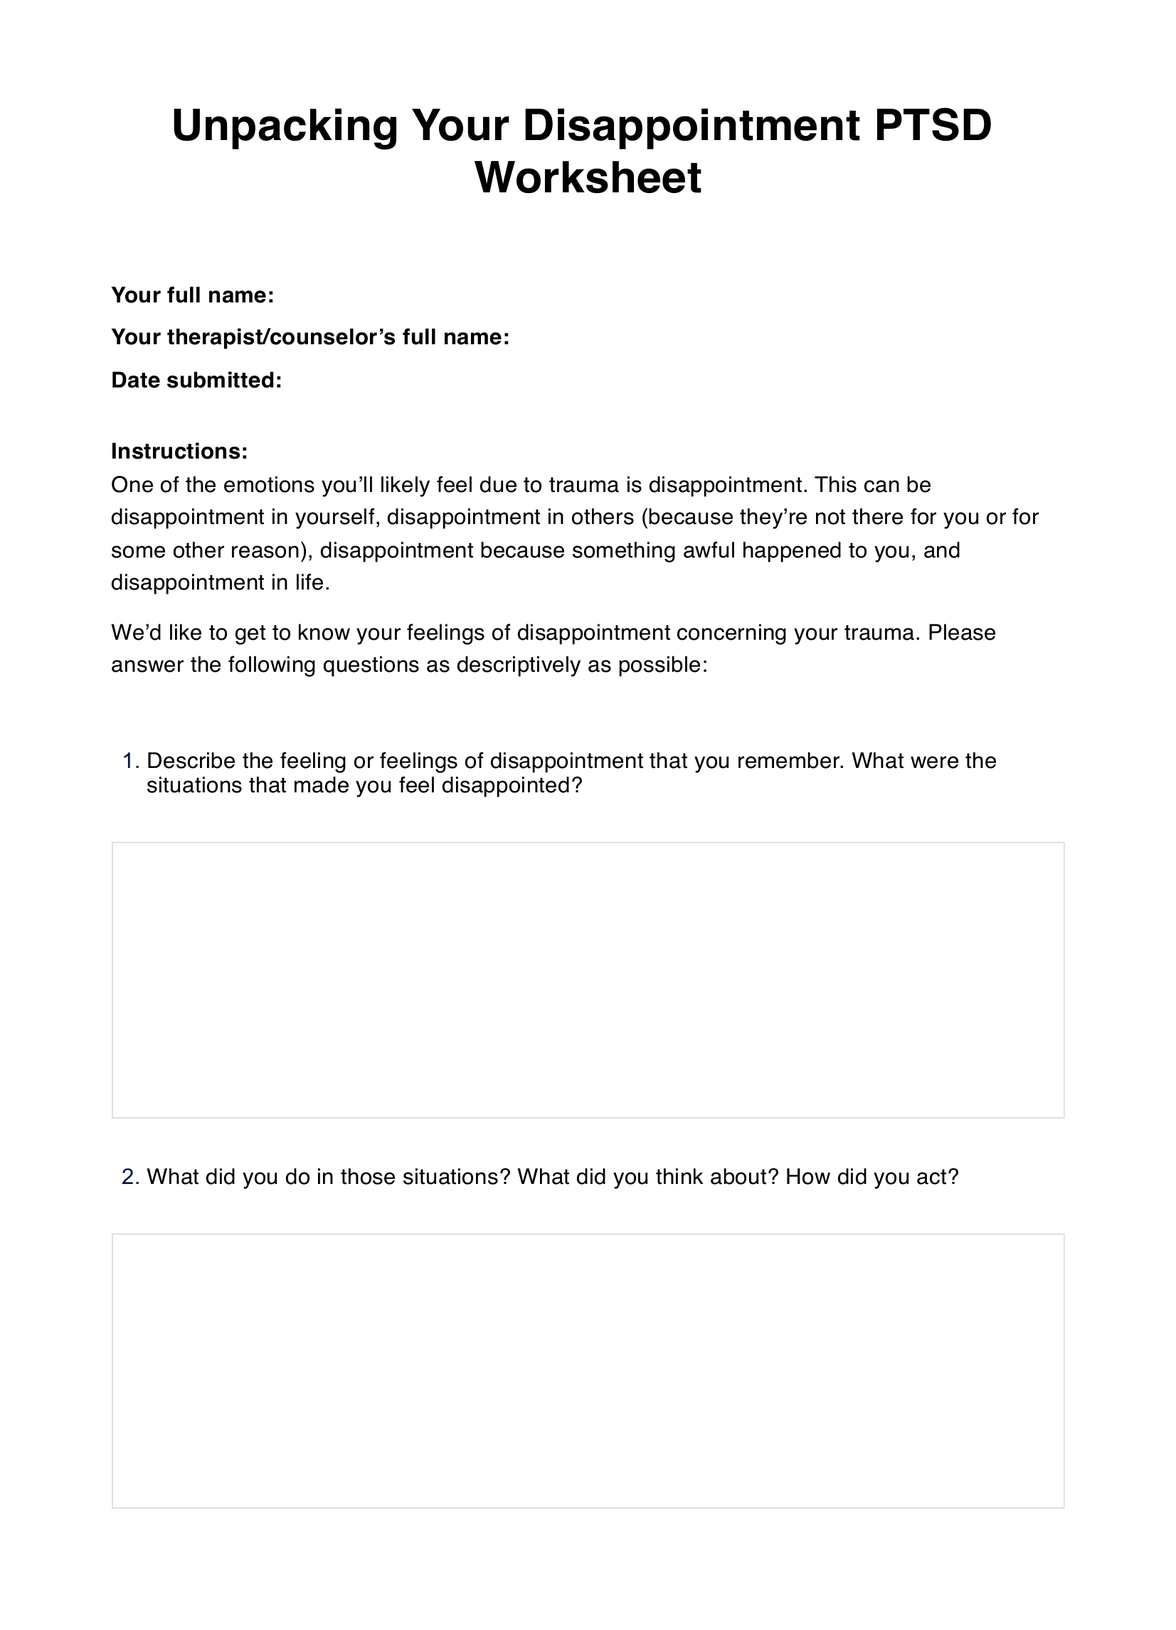 Unpacking Your Disappointment PTSD Worksheet PDF Example